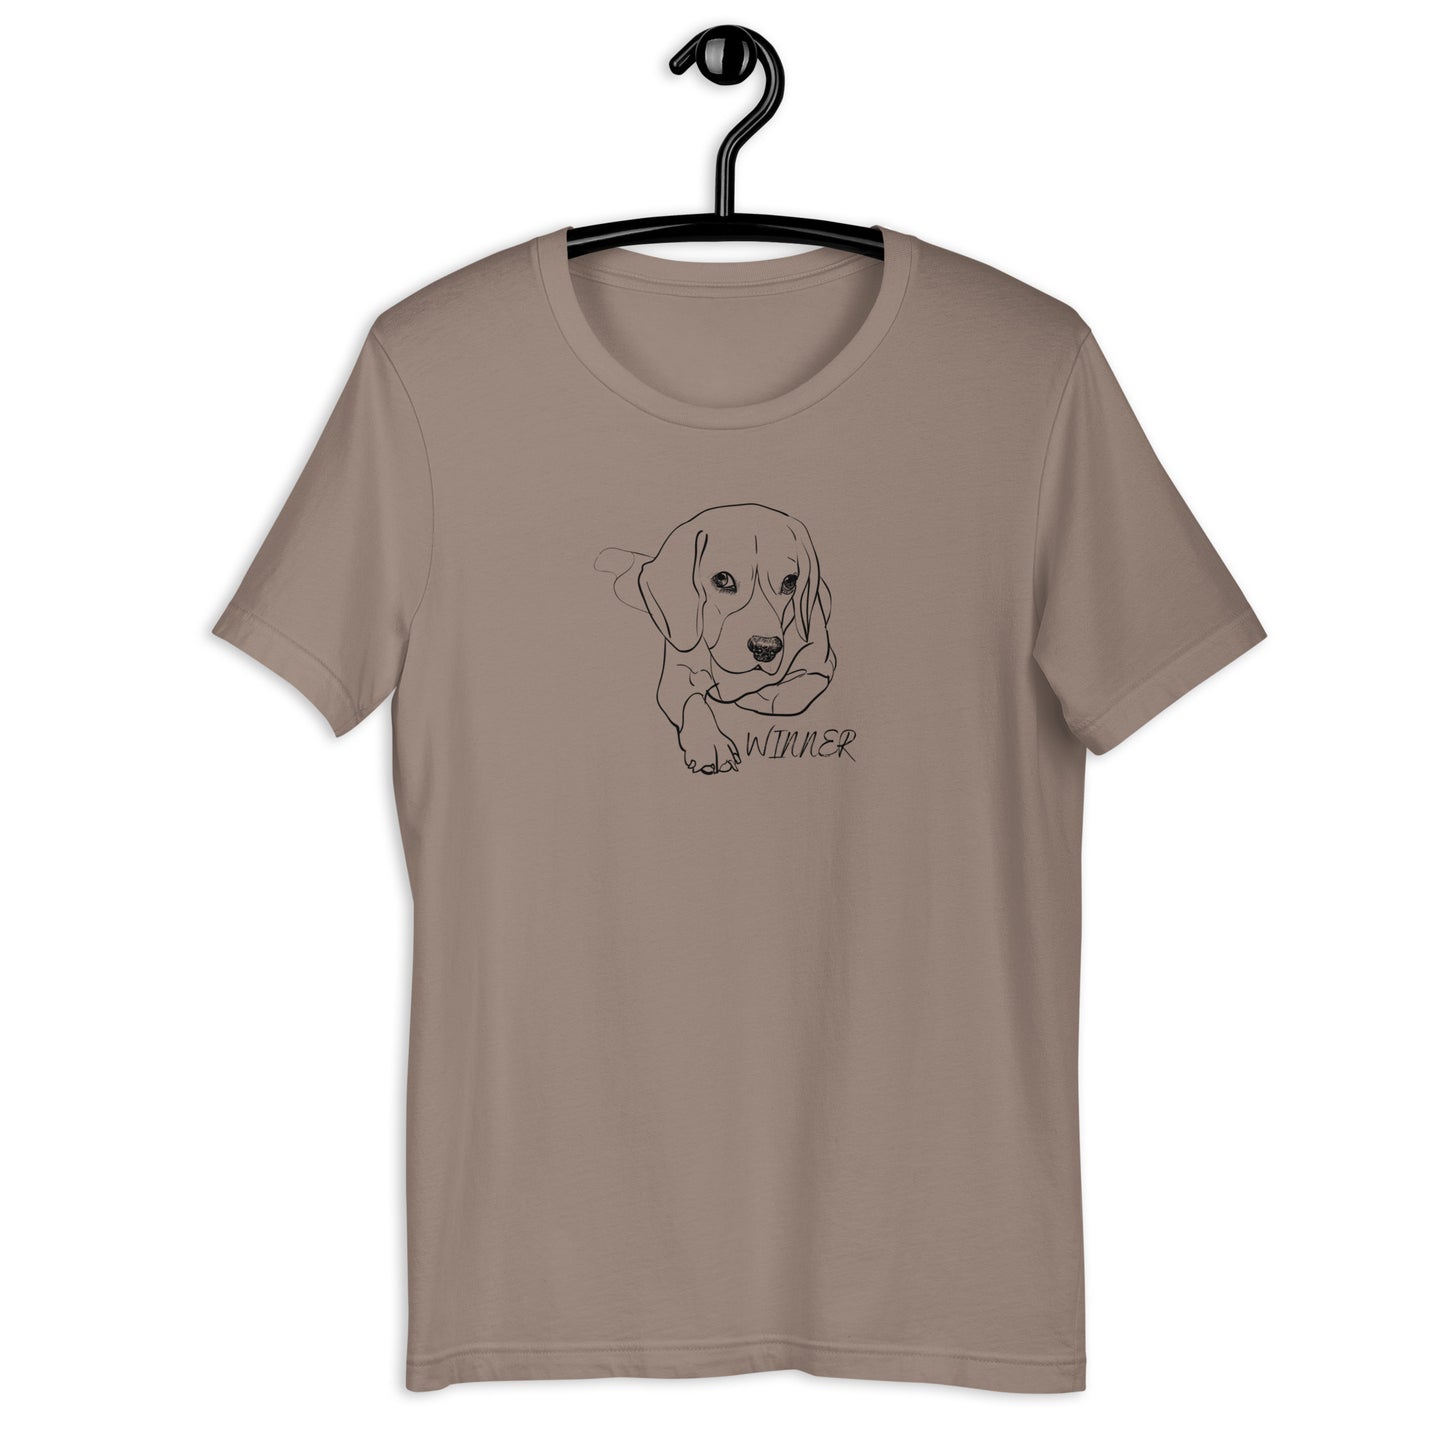 Unisex t-shirt with the image of the Beagle